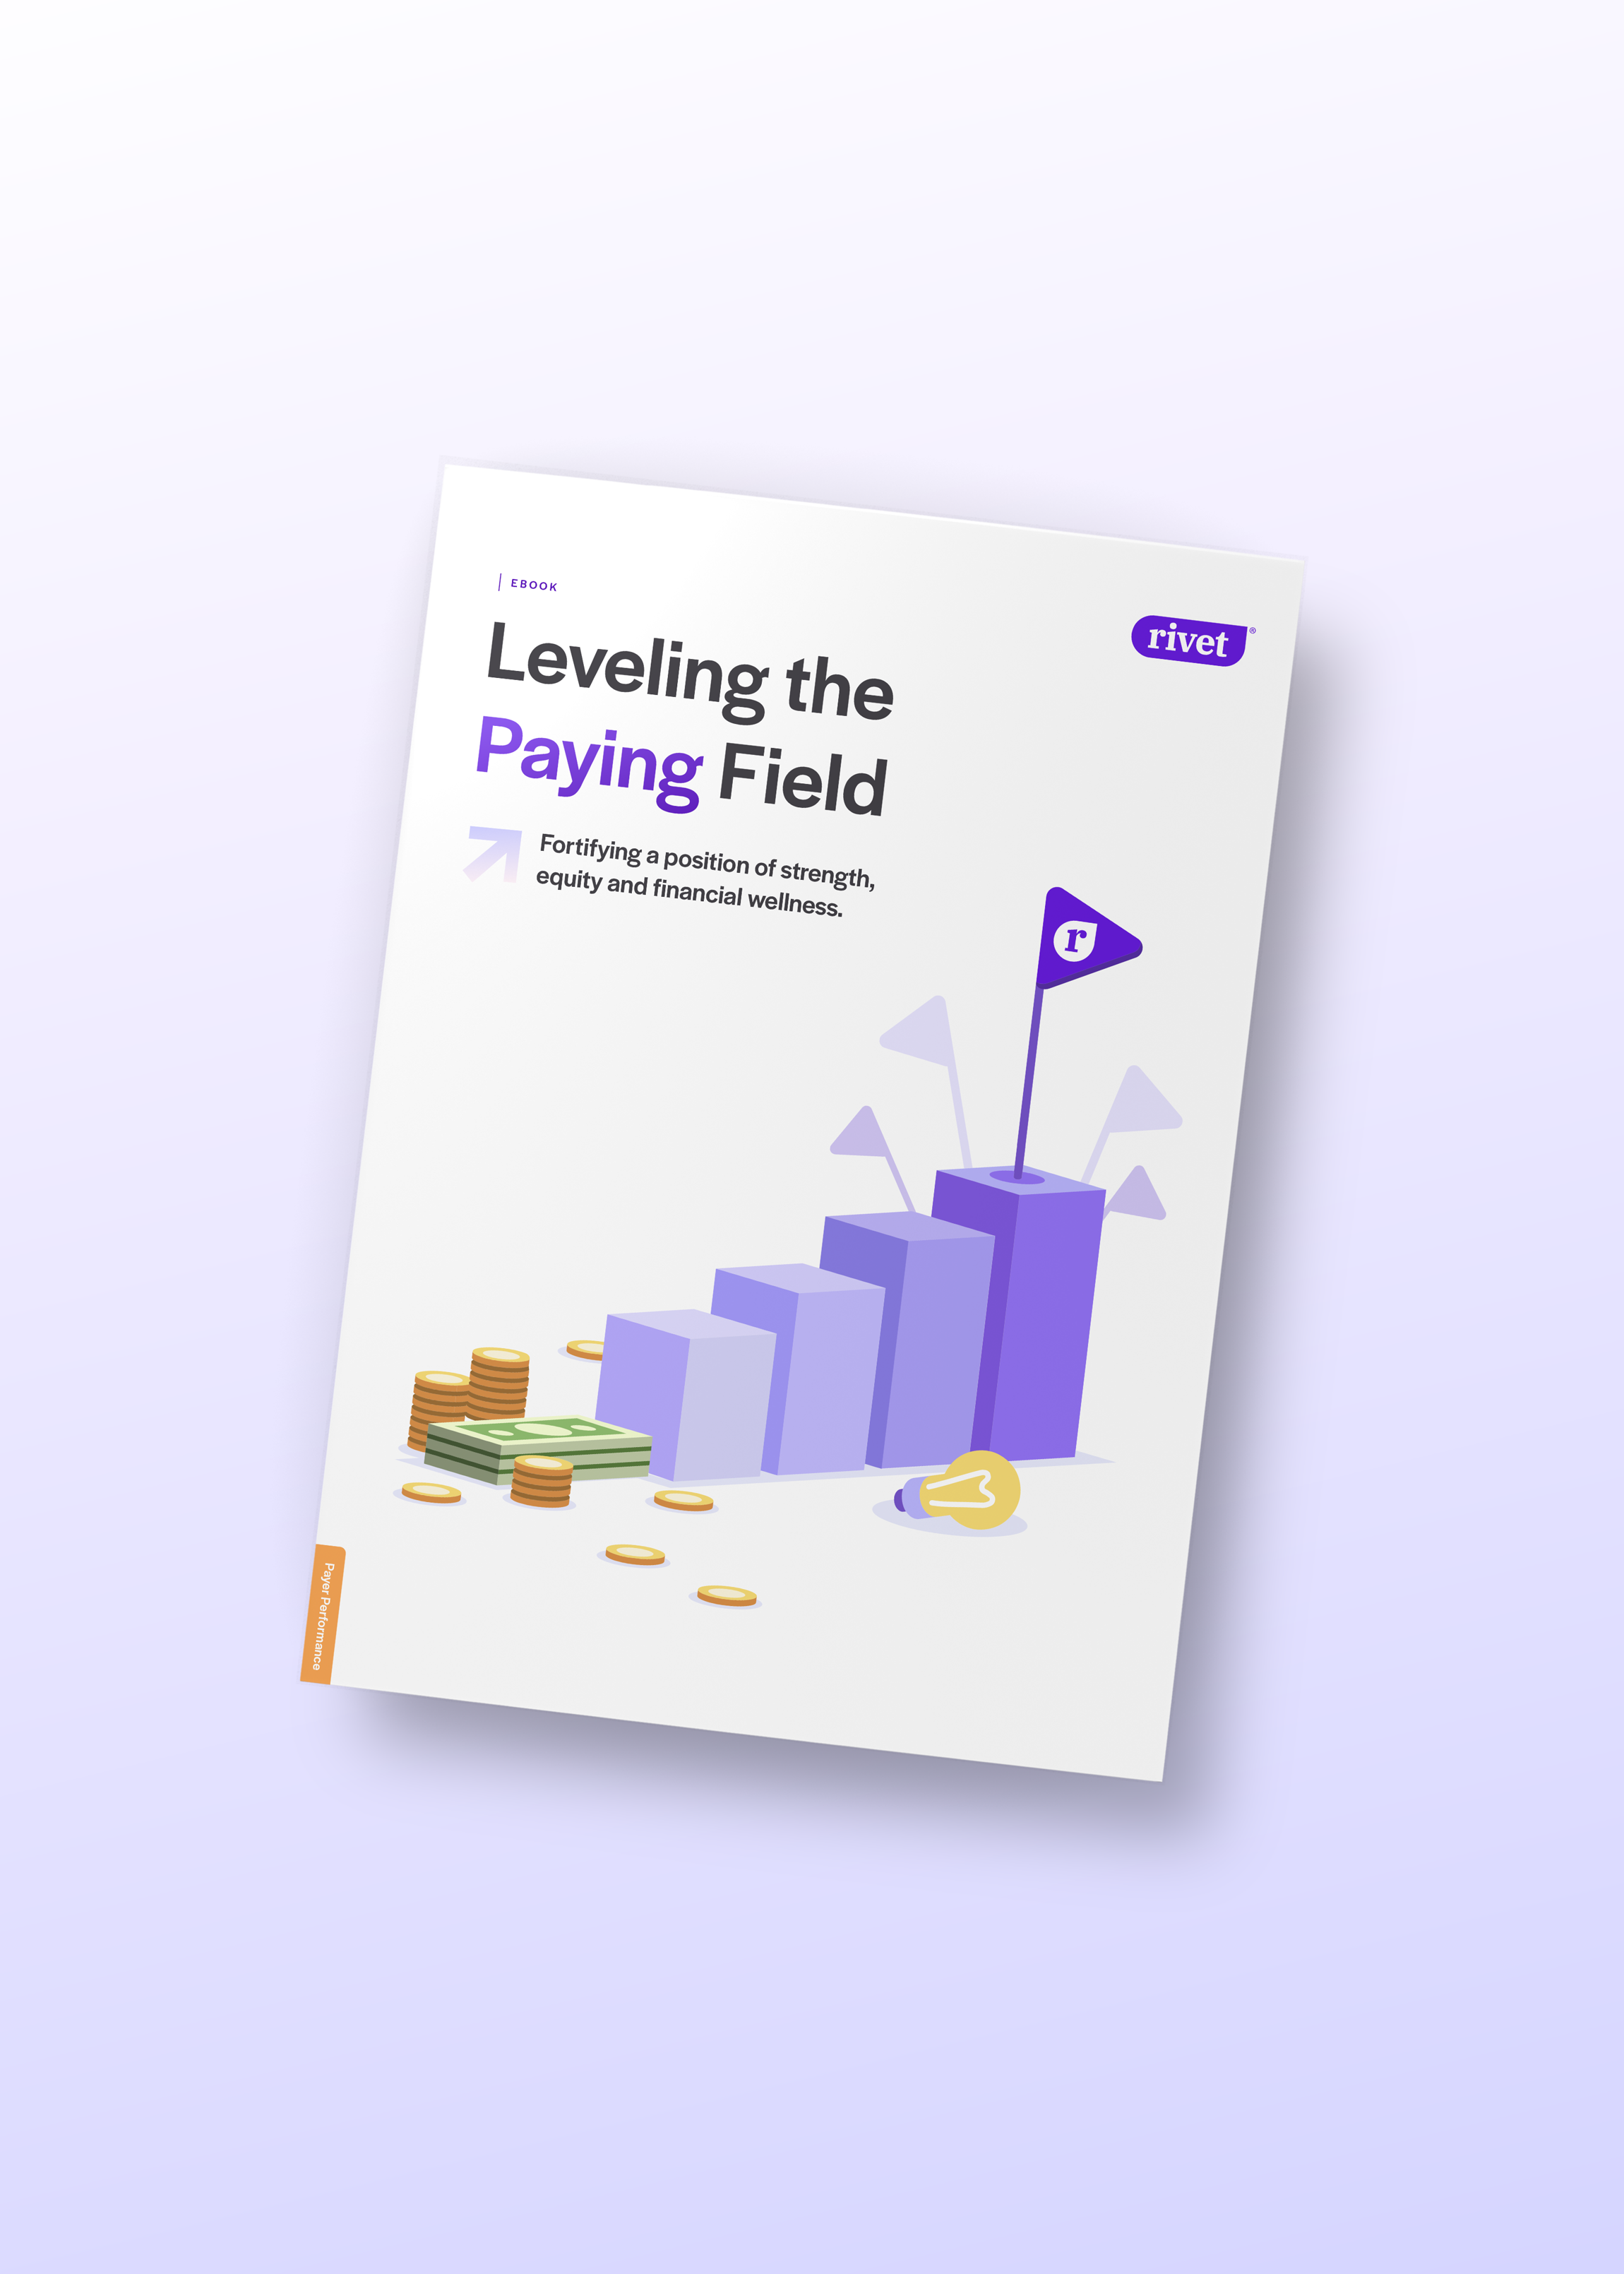 leveling-the-paying-field-ebook-mockup-vertical